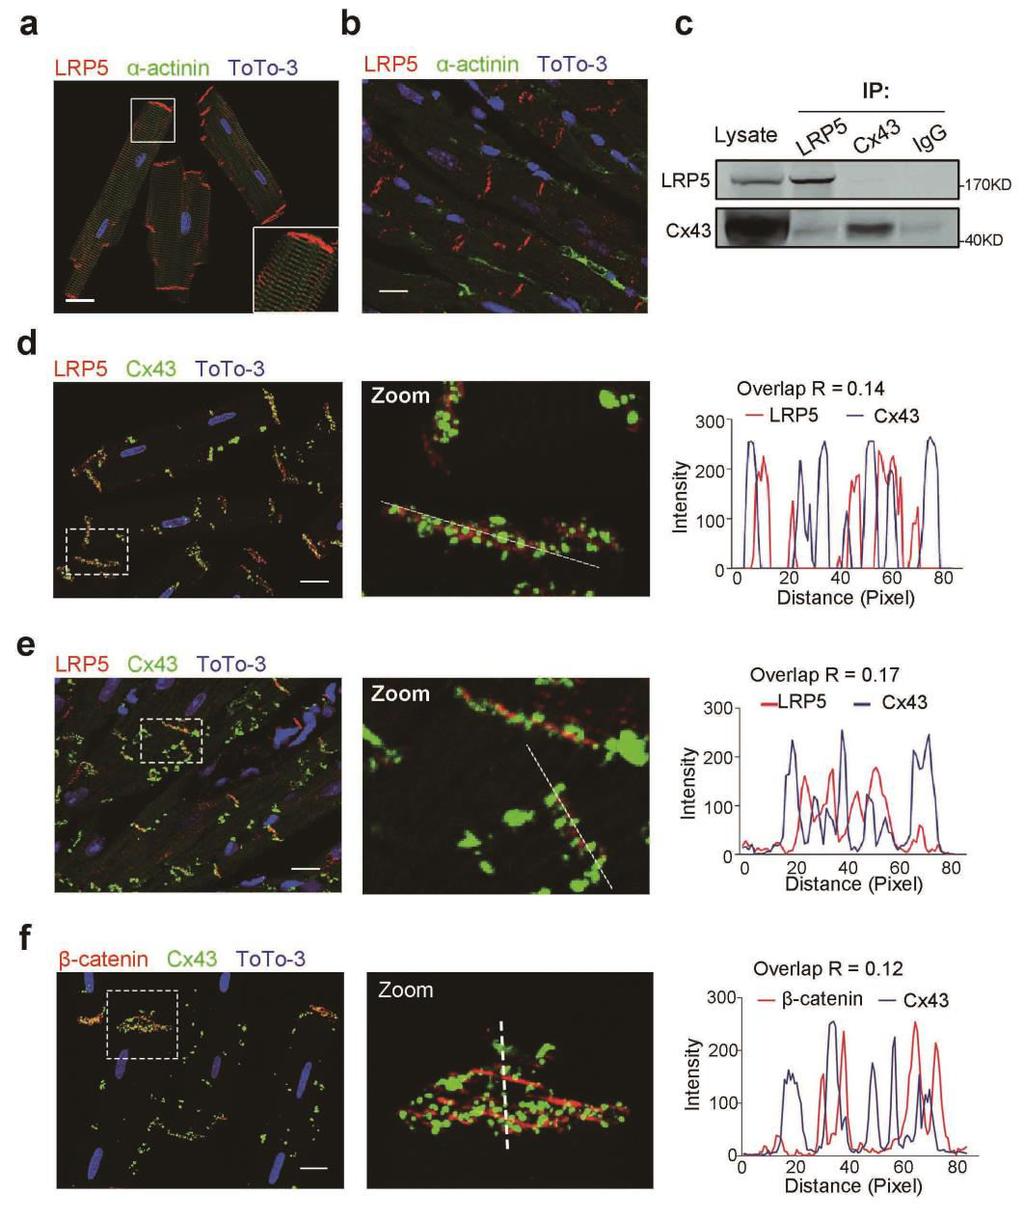 Supplementary Figure 1. Spatial distribution of LRP5 and β-catenin in intact cardiomyocytes.